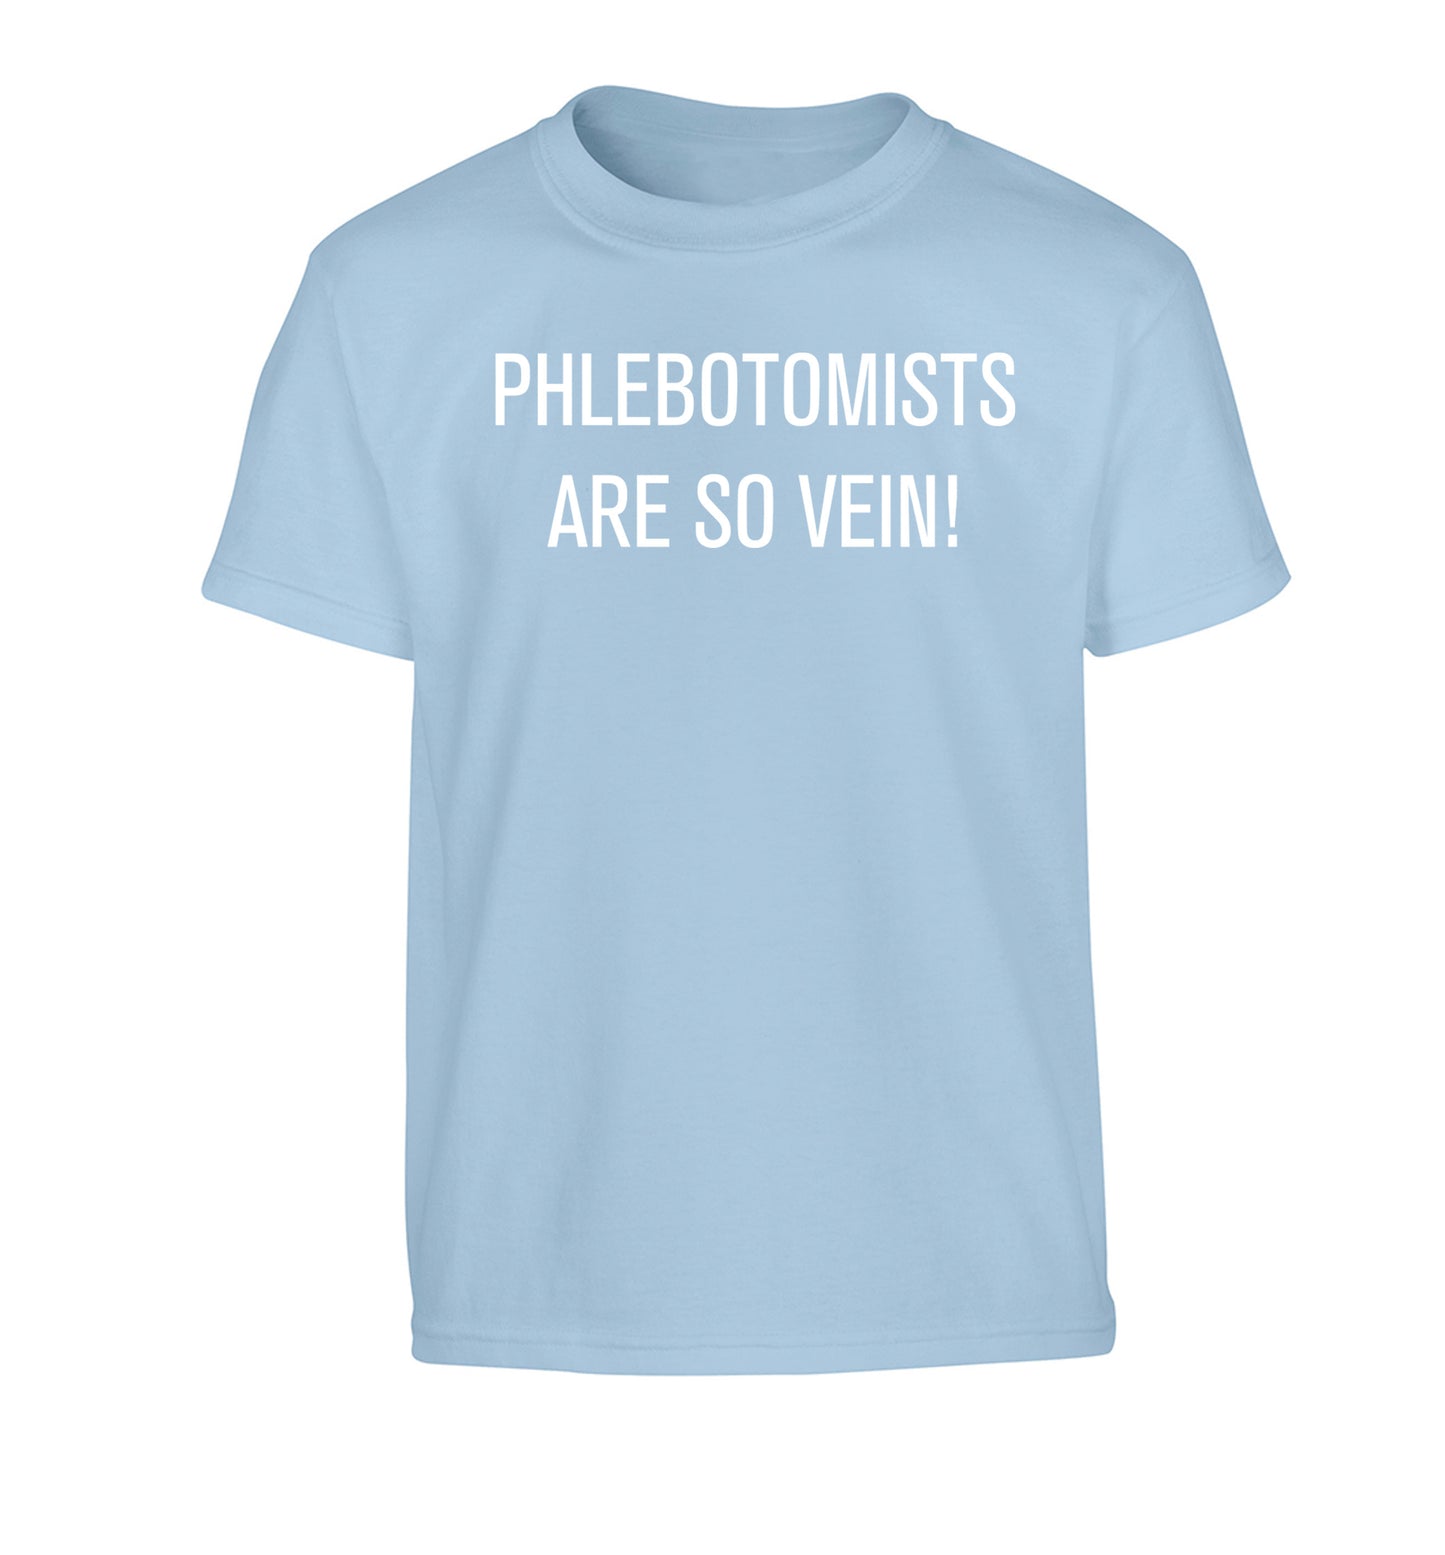 Phlebotomists are so vein! Children's light blue Tshirt 12-14 Years